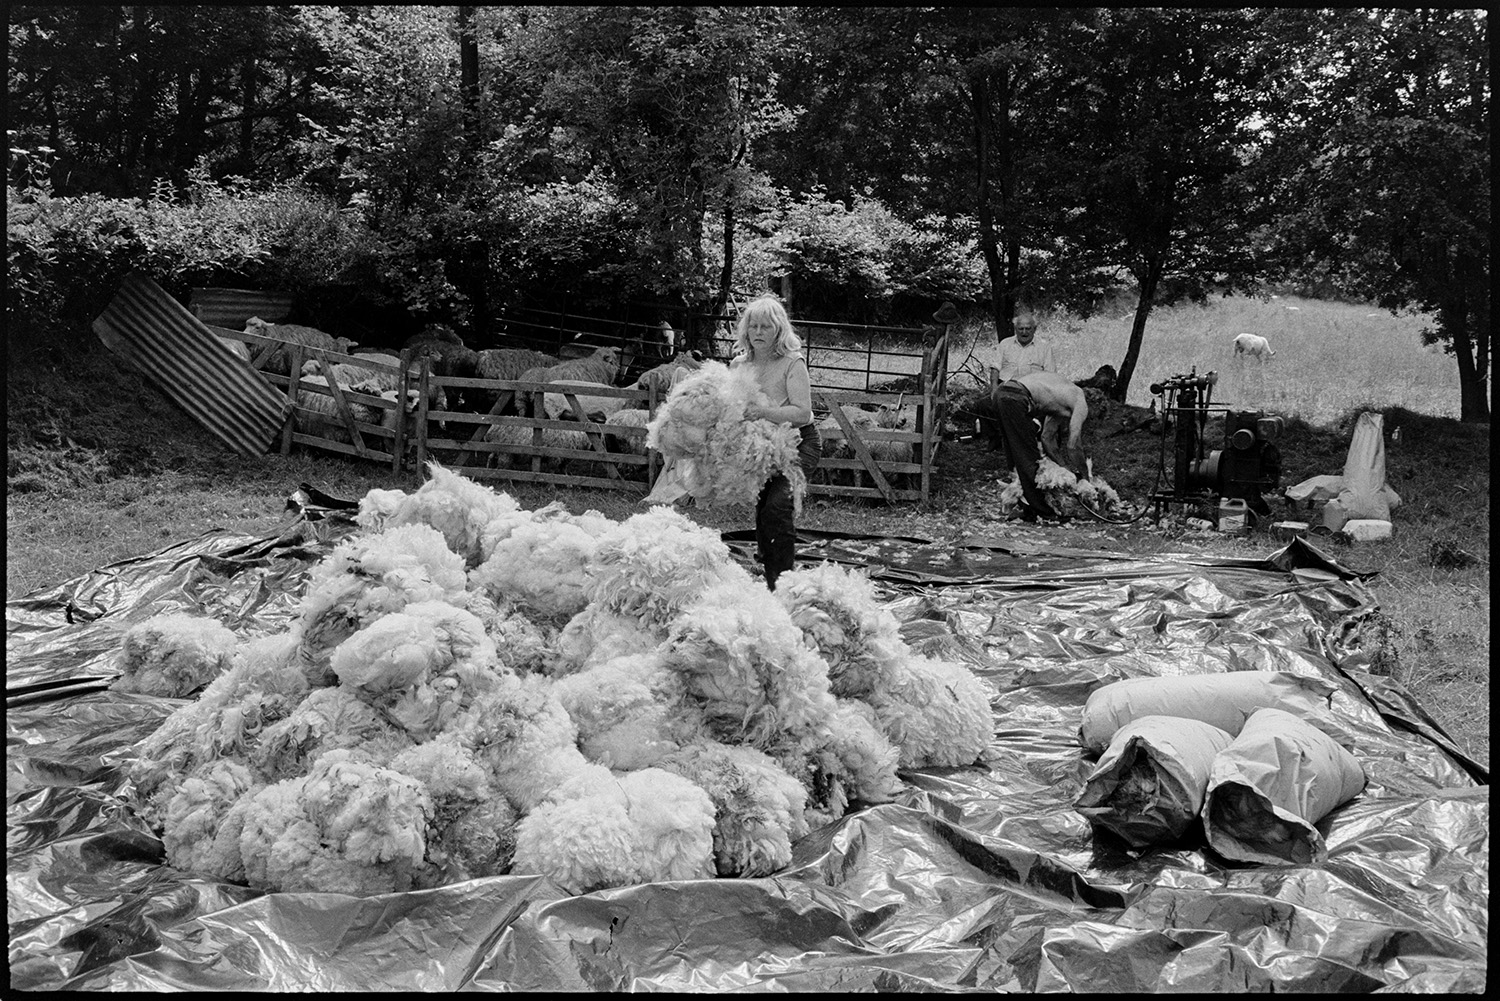 Shearing sheep, farmer seated with dog, fleeces piled up in sun. 
[Jo Curzon bundling up folded sheep fleeces on a large tarpaulin in a field at Addisford, Dolton. A man is shearing a sheep in the background, using a shearing machine. Archie Parkhouse is sat behind him and other sheep are waiting to be shorn in a pen nearby.]